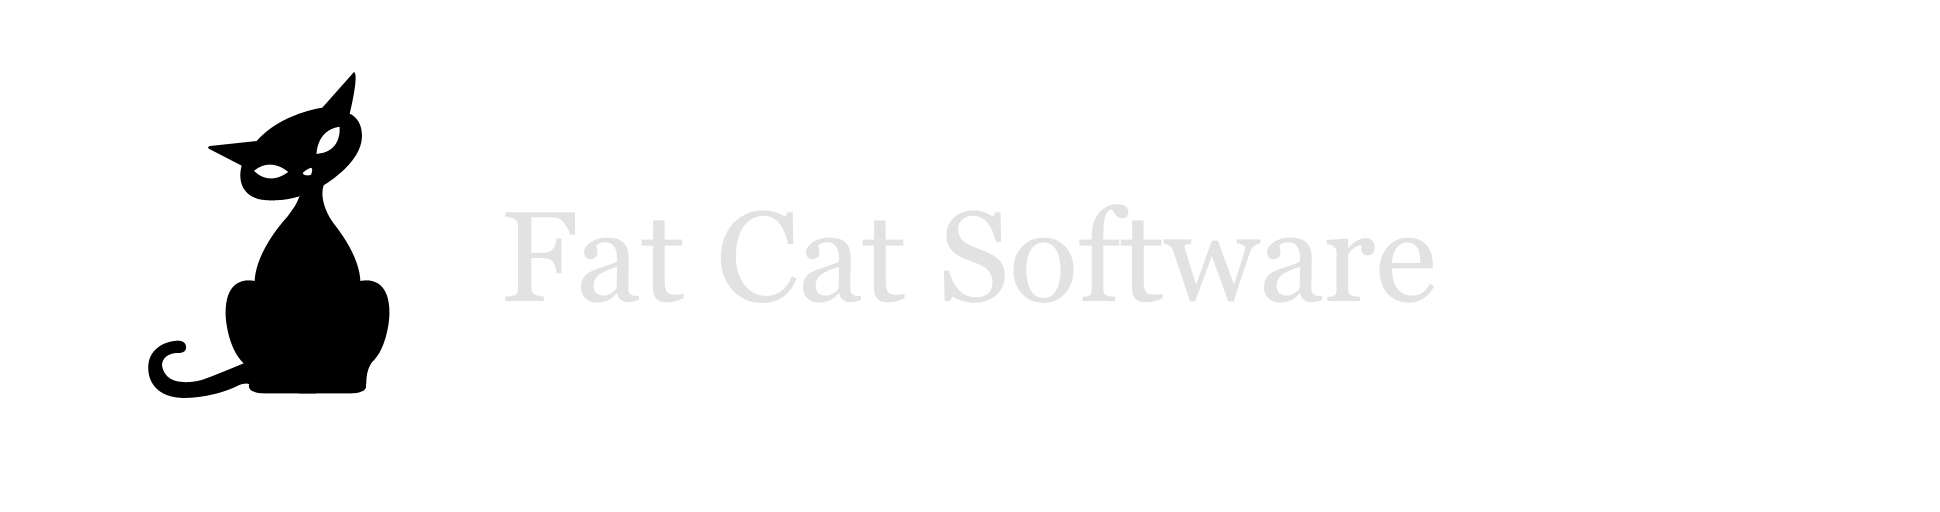 fat cat software iphoto library manager